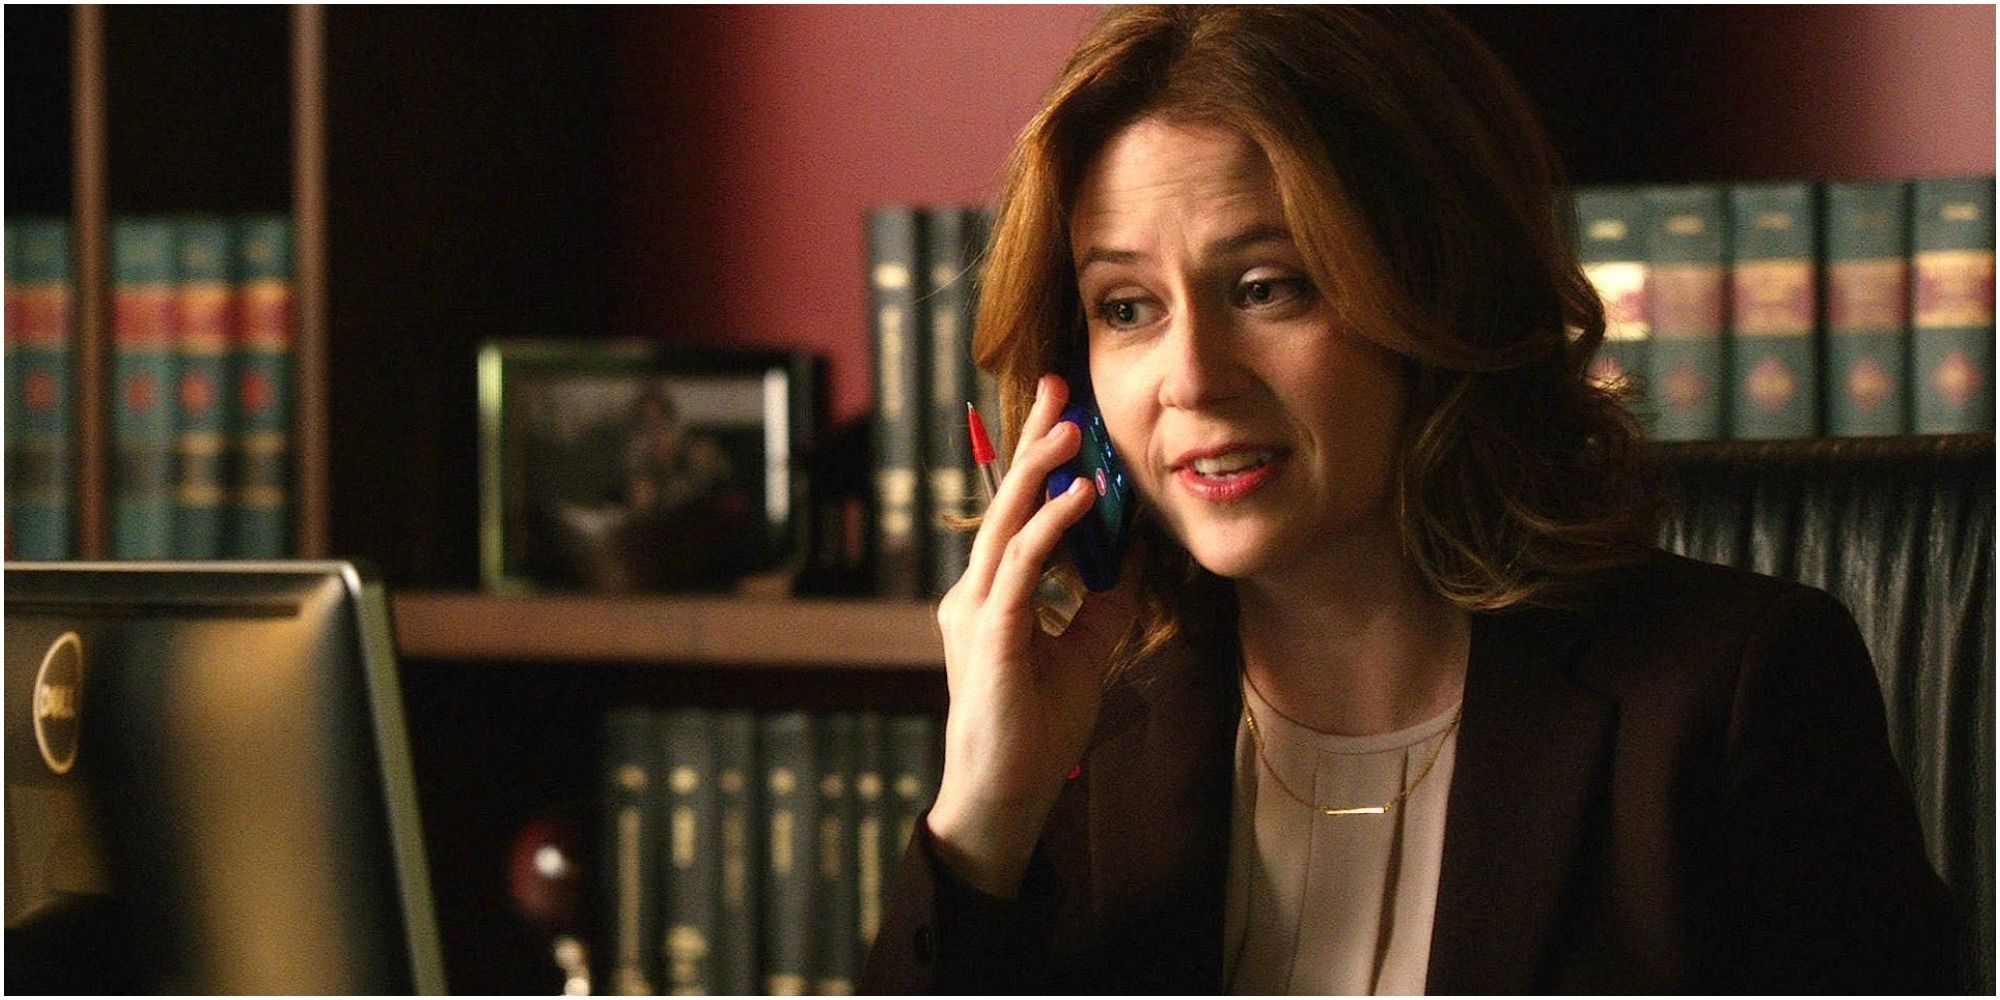 Jenna Fischer as Jennifer Lambert in the police series The Mysteries of Laura